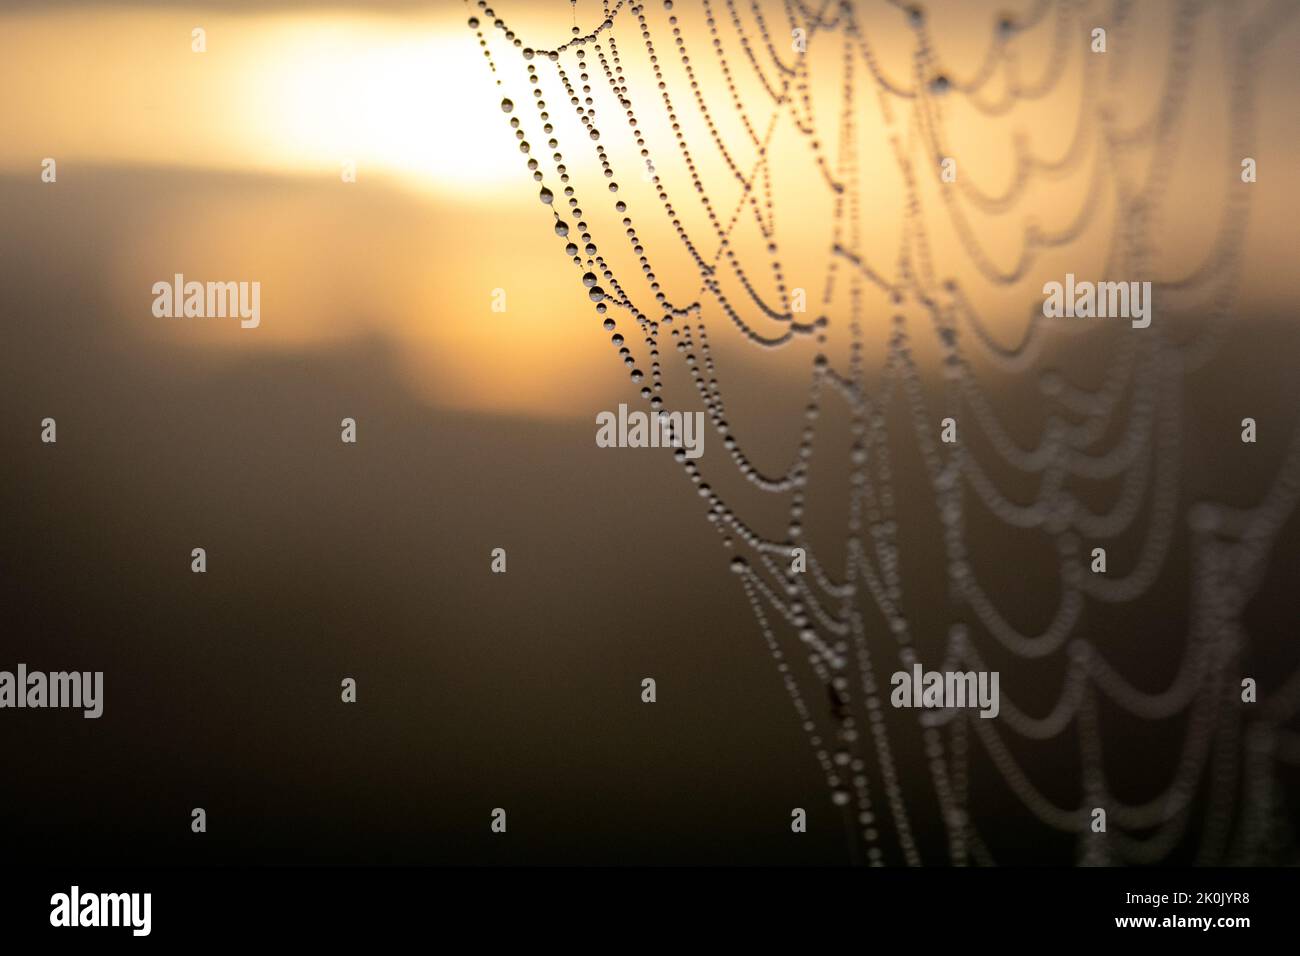 Beads of dew on a spider's web with warm sunrise behind, September morning Stock Photo